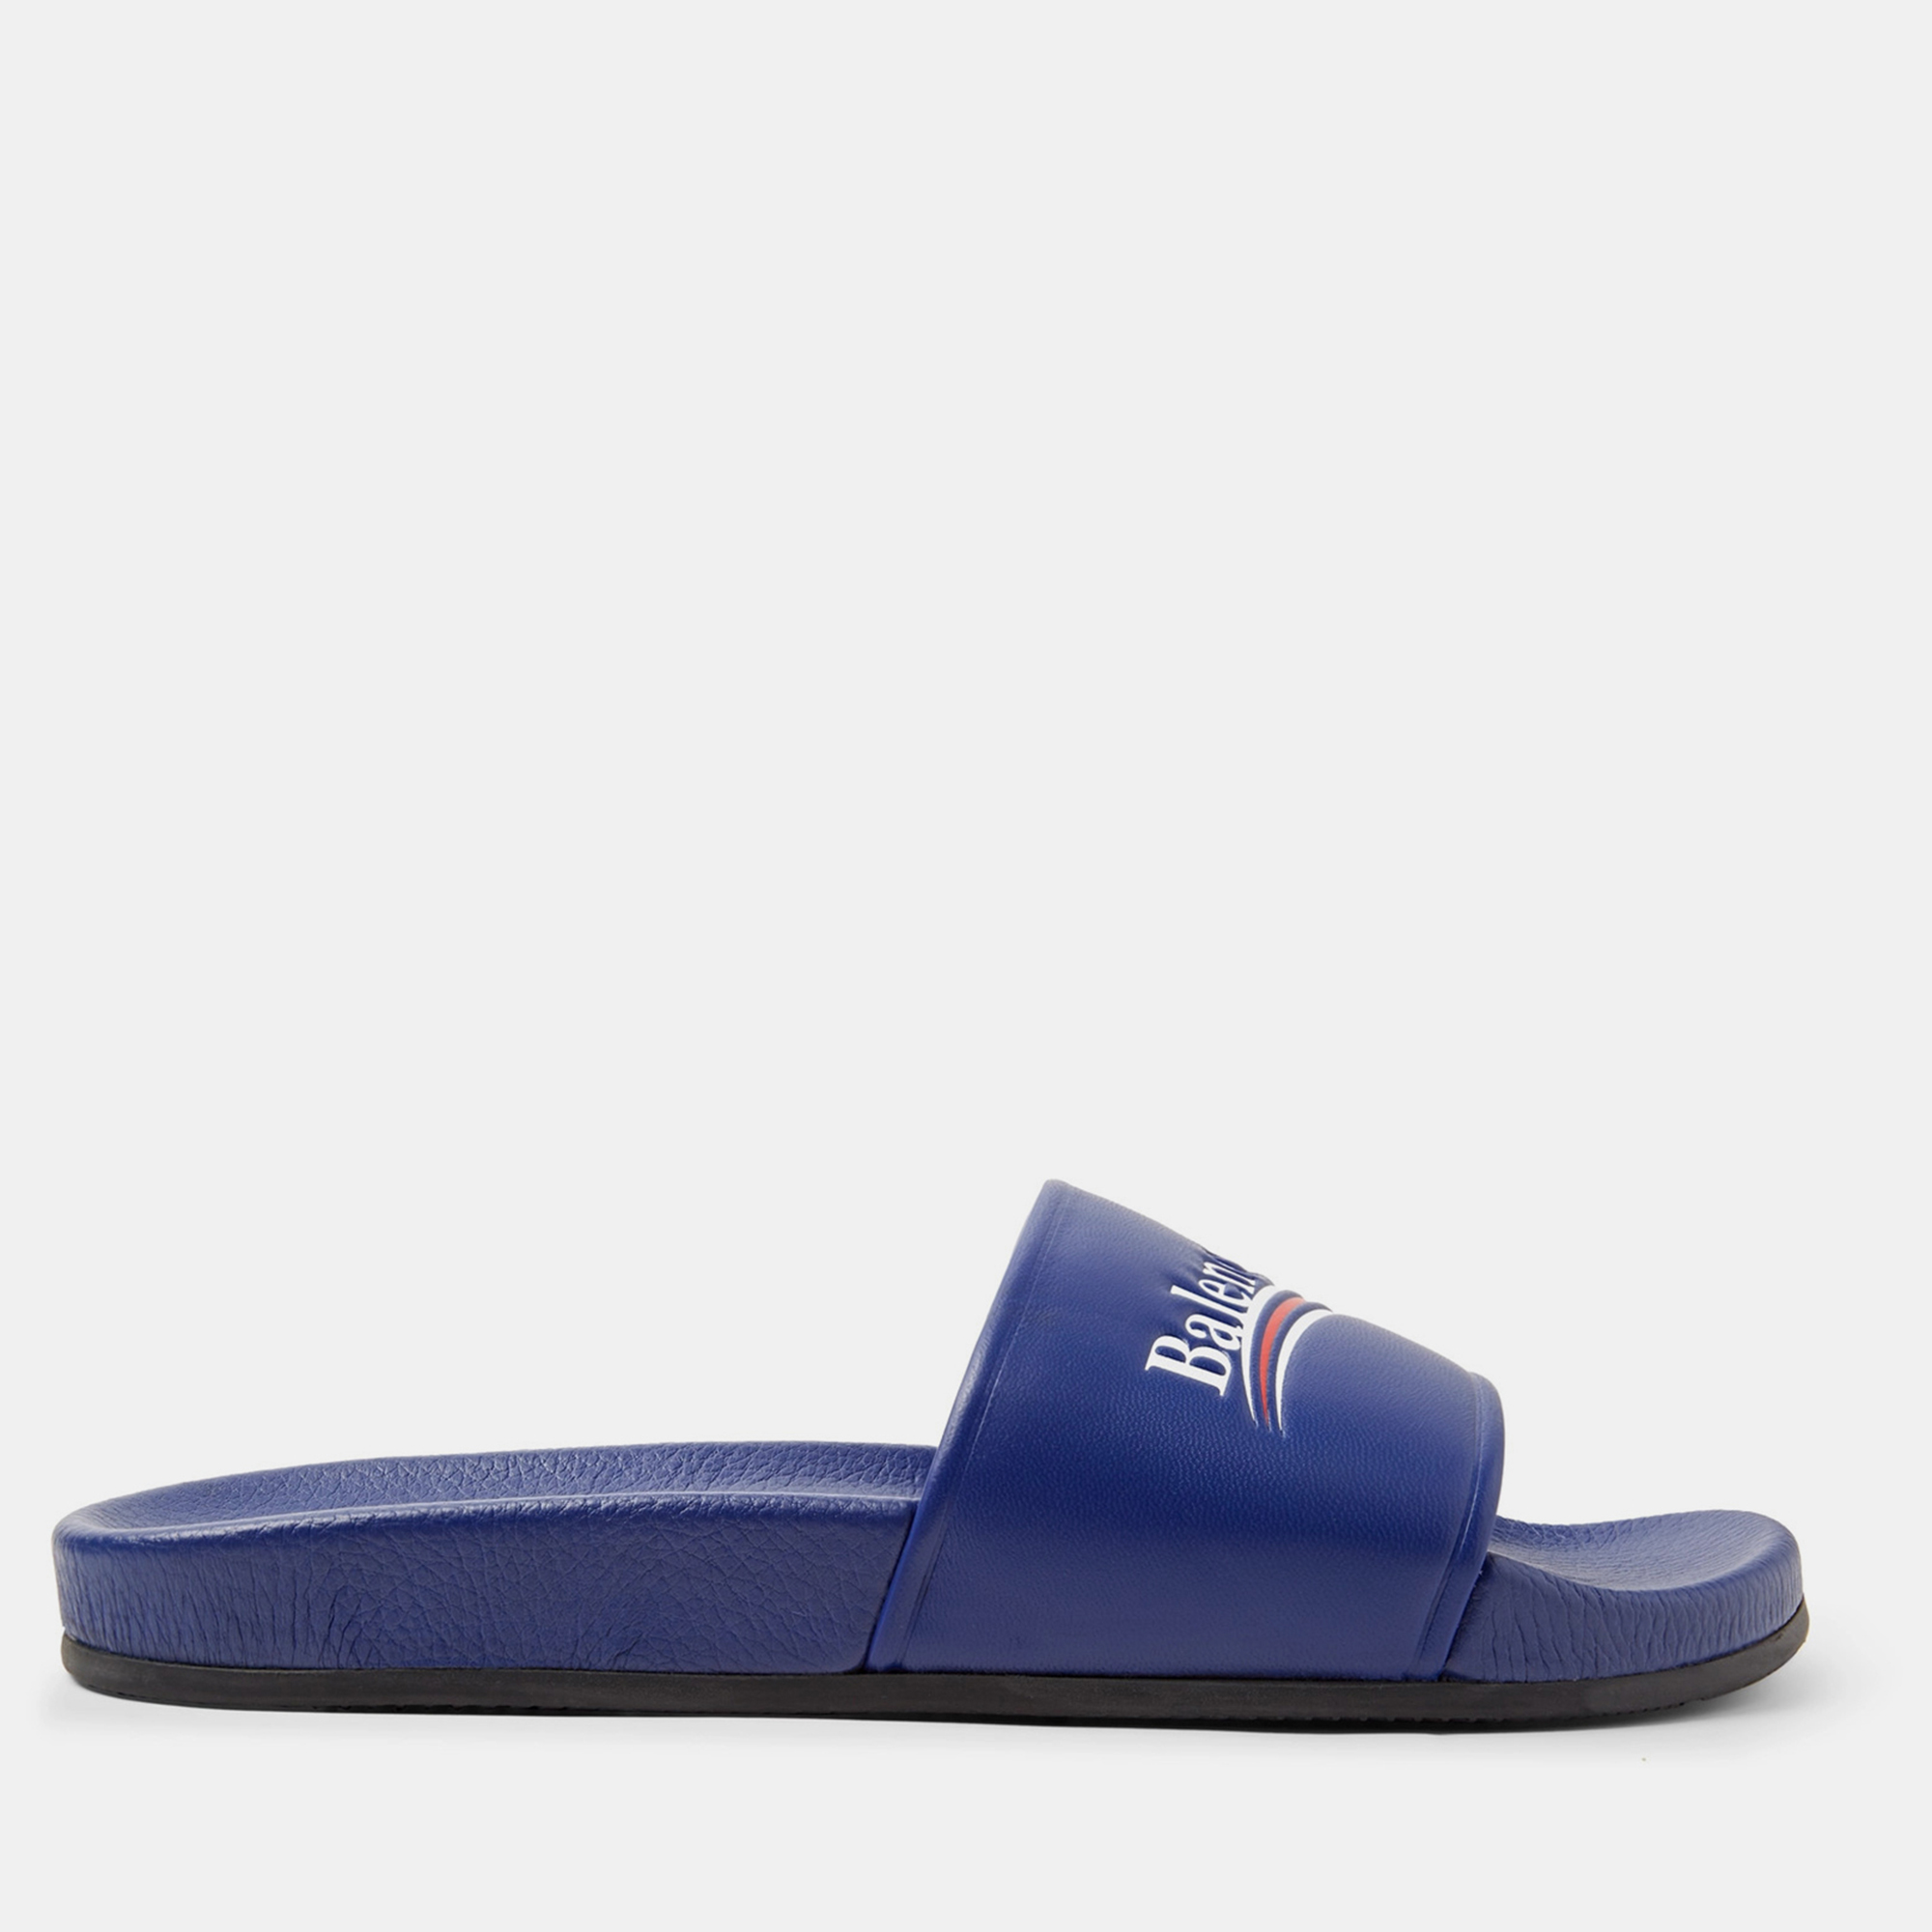 Pre-owned Balenciaga Blue Leather Flat Slides Size 39